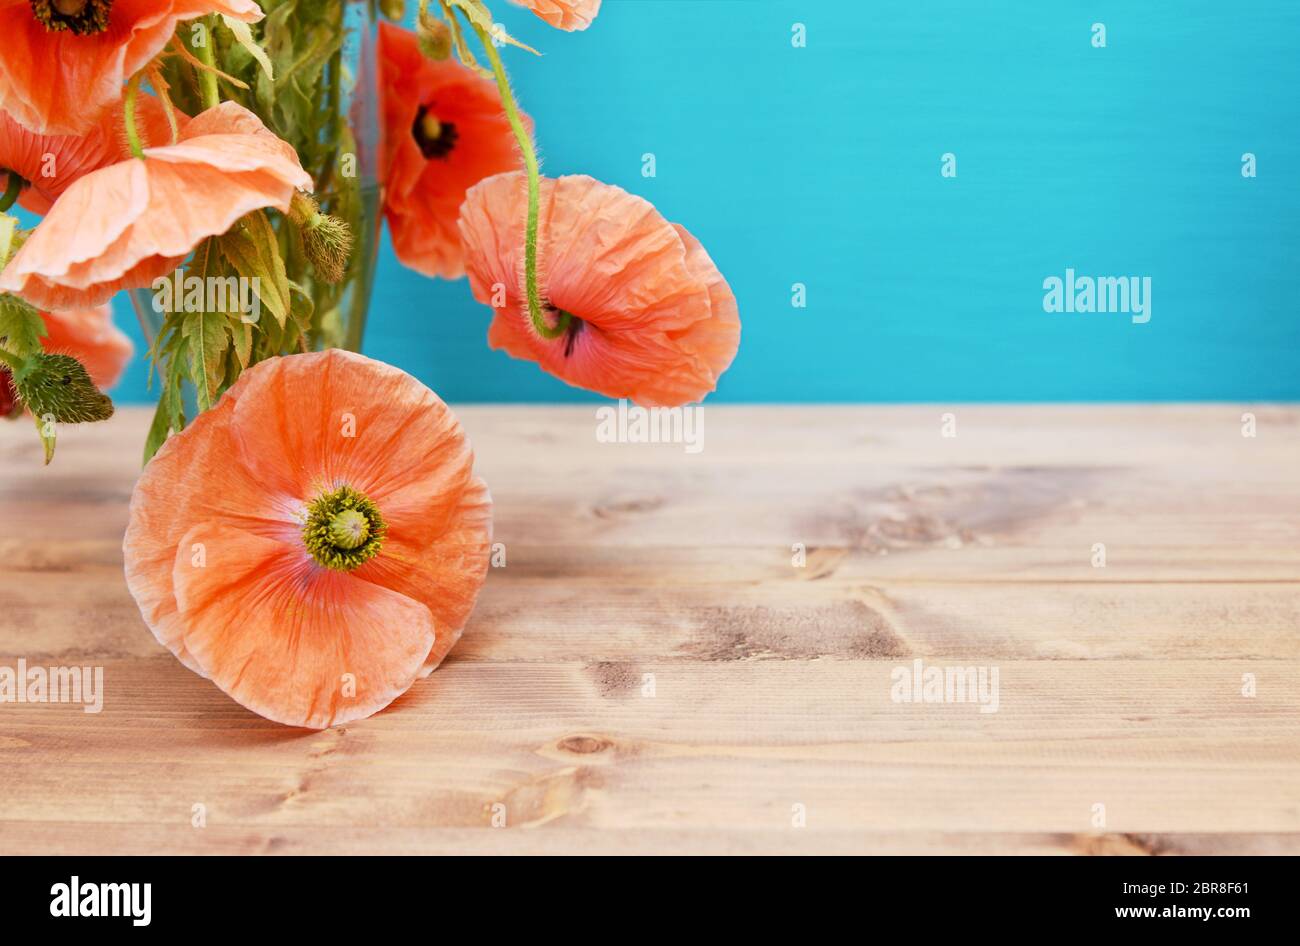 Detail of pink poppies with soft petals cascading from a glass vase on winding stems. Copy space on turquoise background and wooden table. Stock Photo